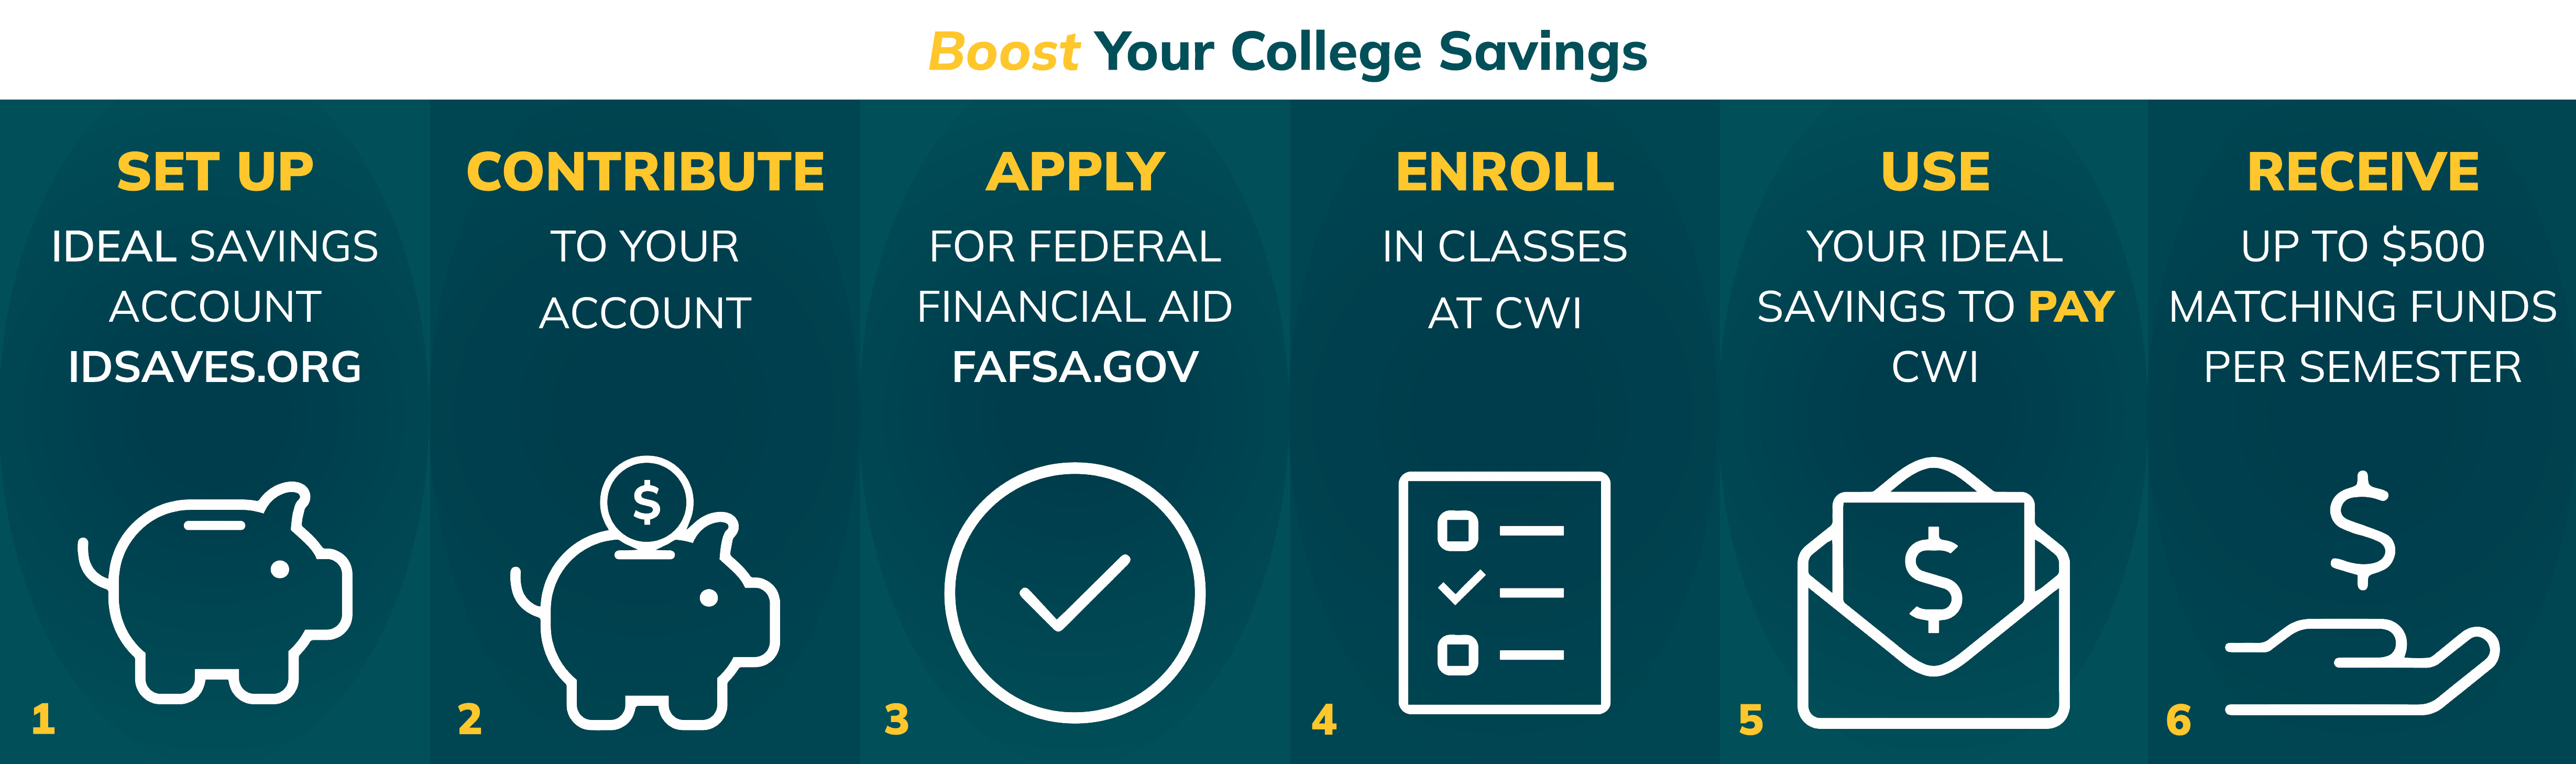 Process: Submit your FAFSA, CWI receives it. Submit documentation if required. Receive award notification. Aid is applied to your account. Refund begin if applicable. Keep eligibility with academic progress.